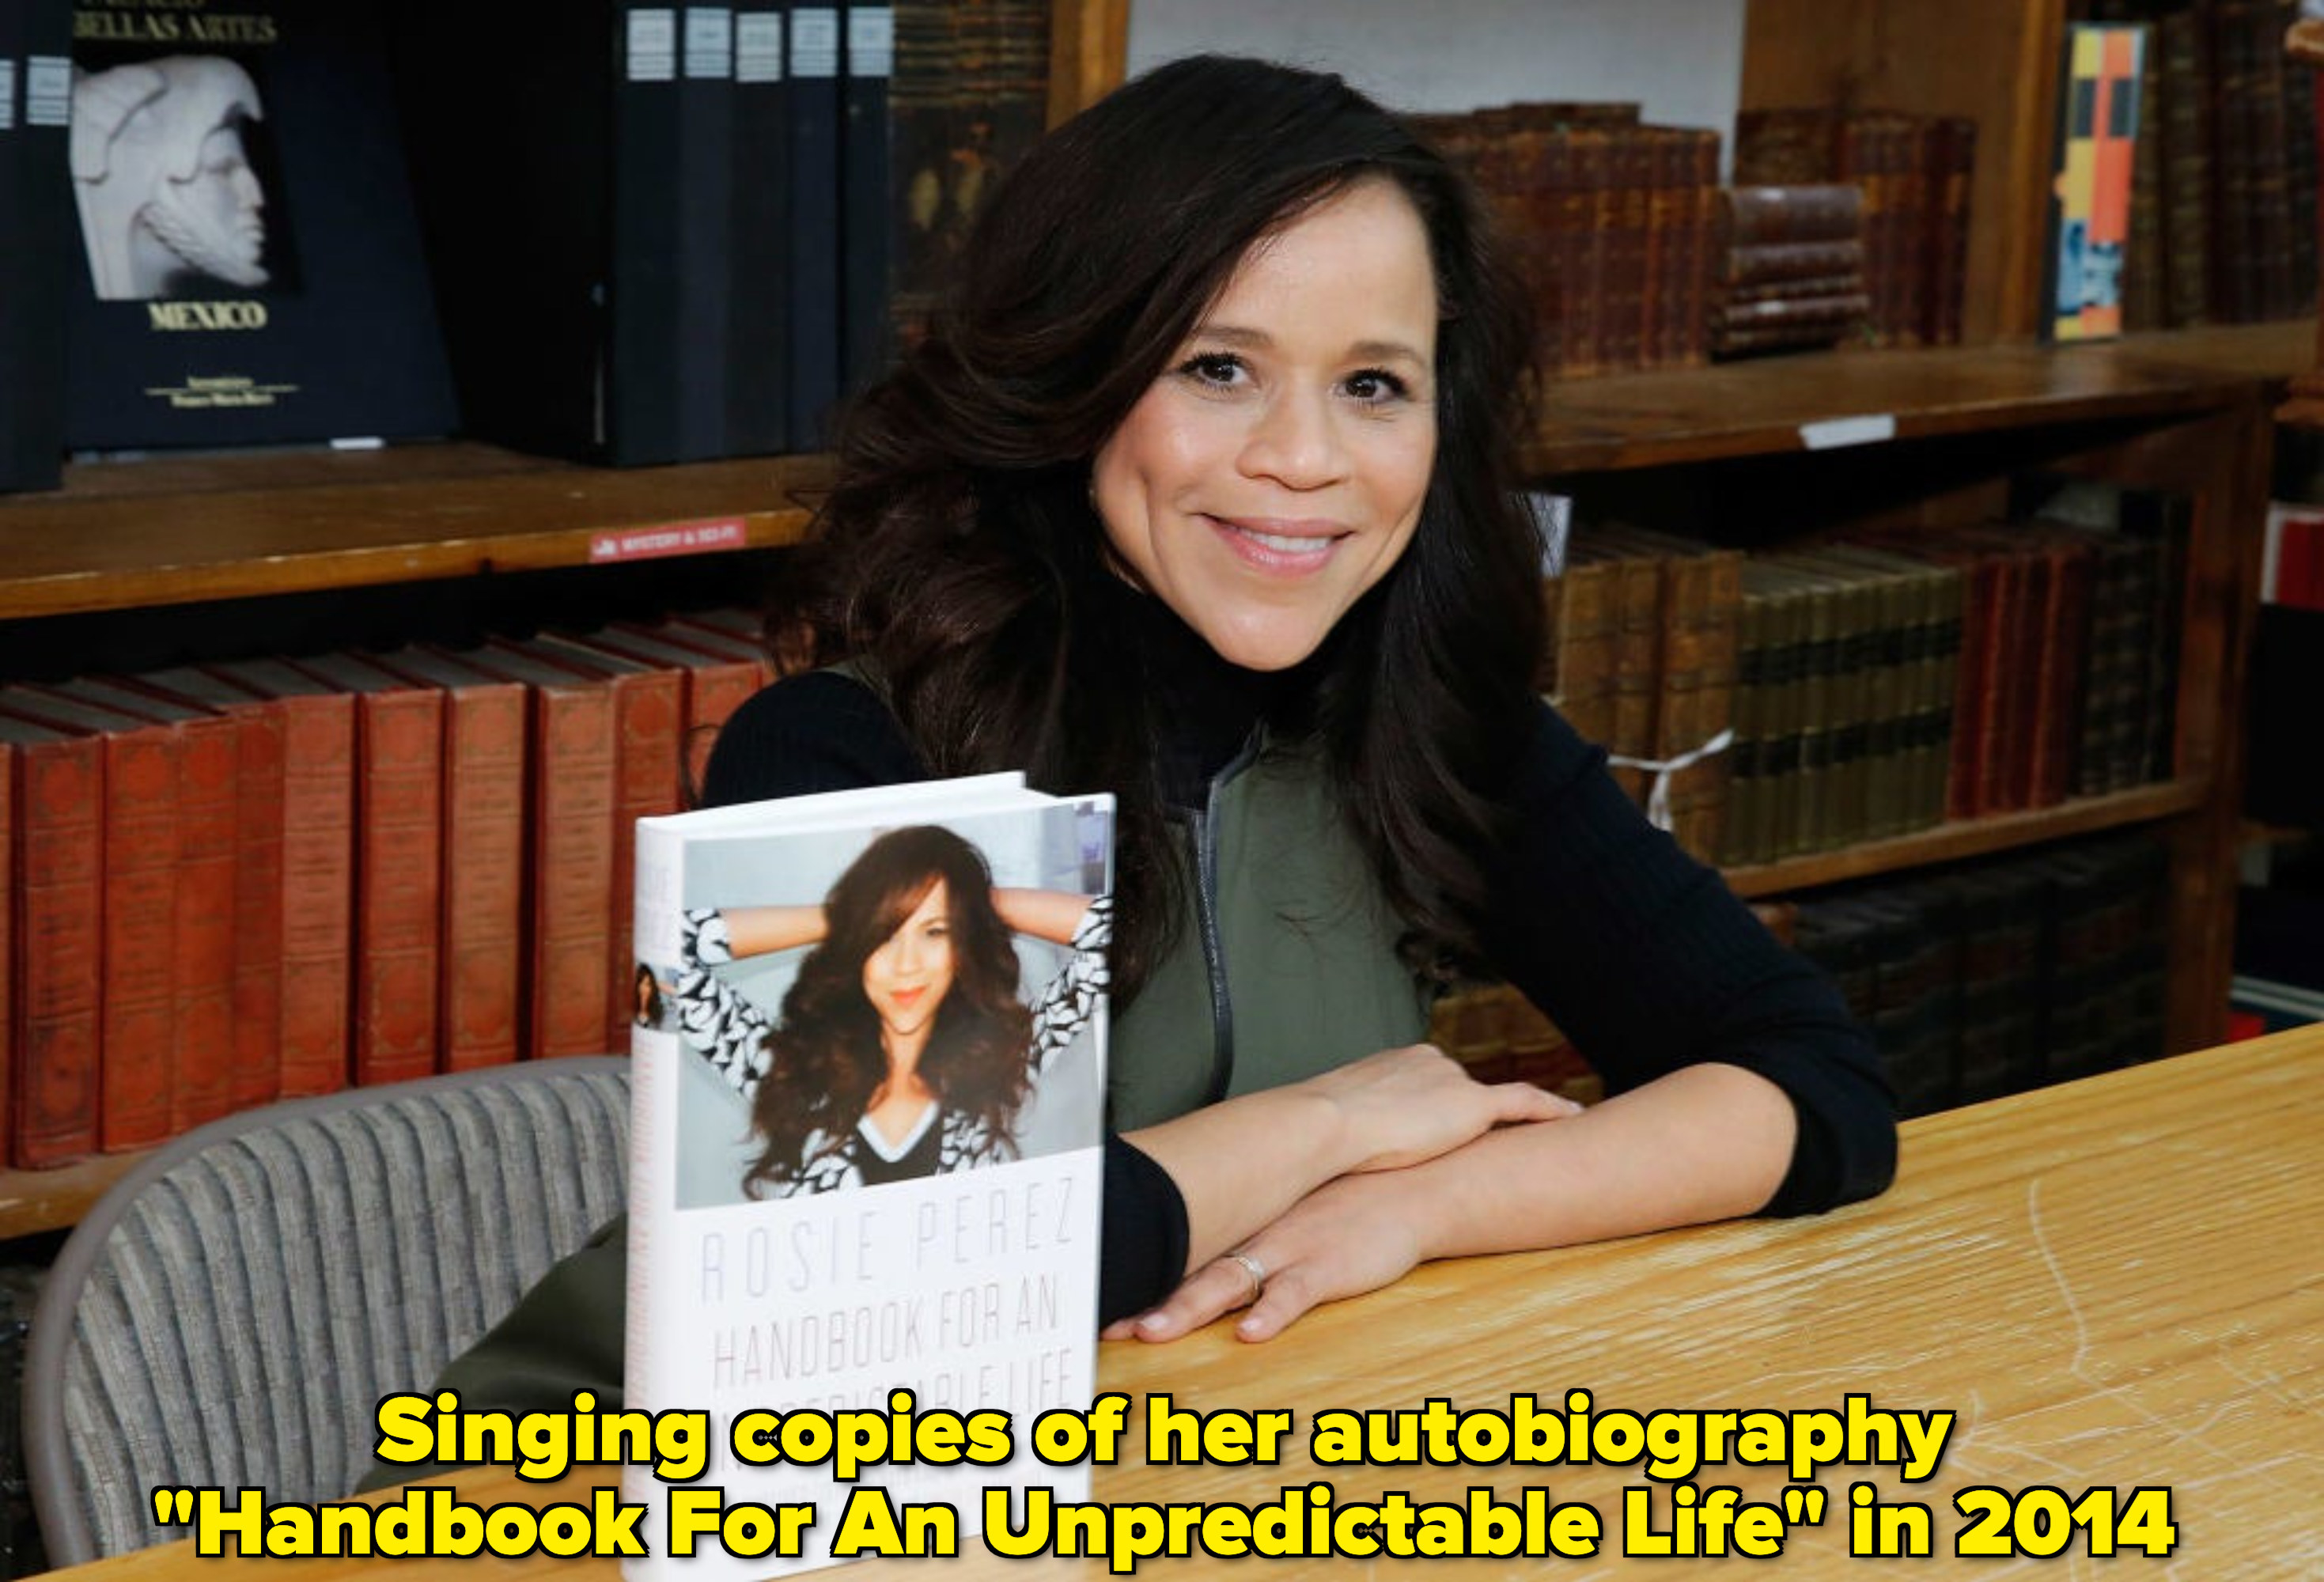 Rosie Perez at a book signing